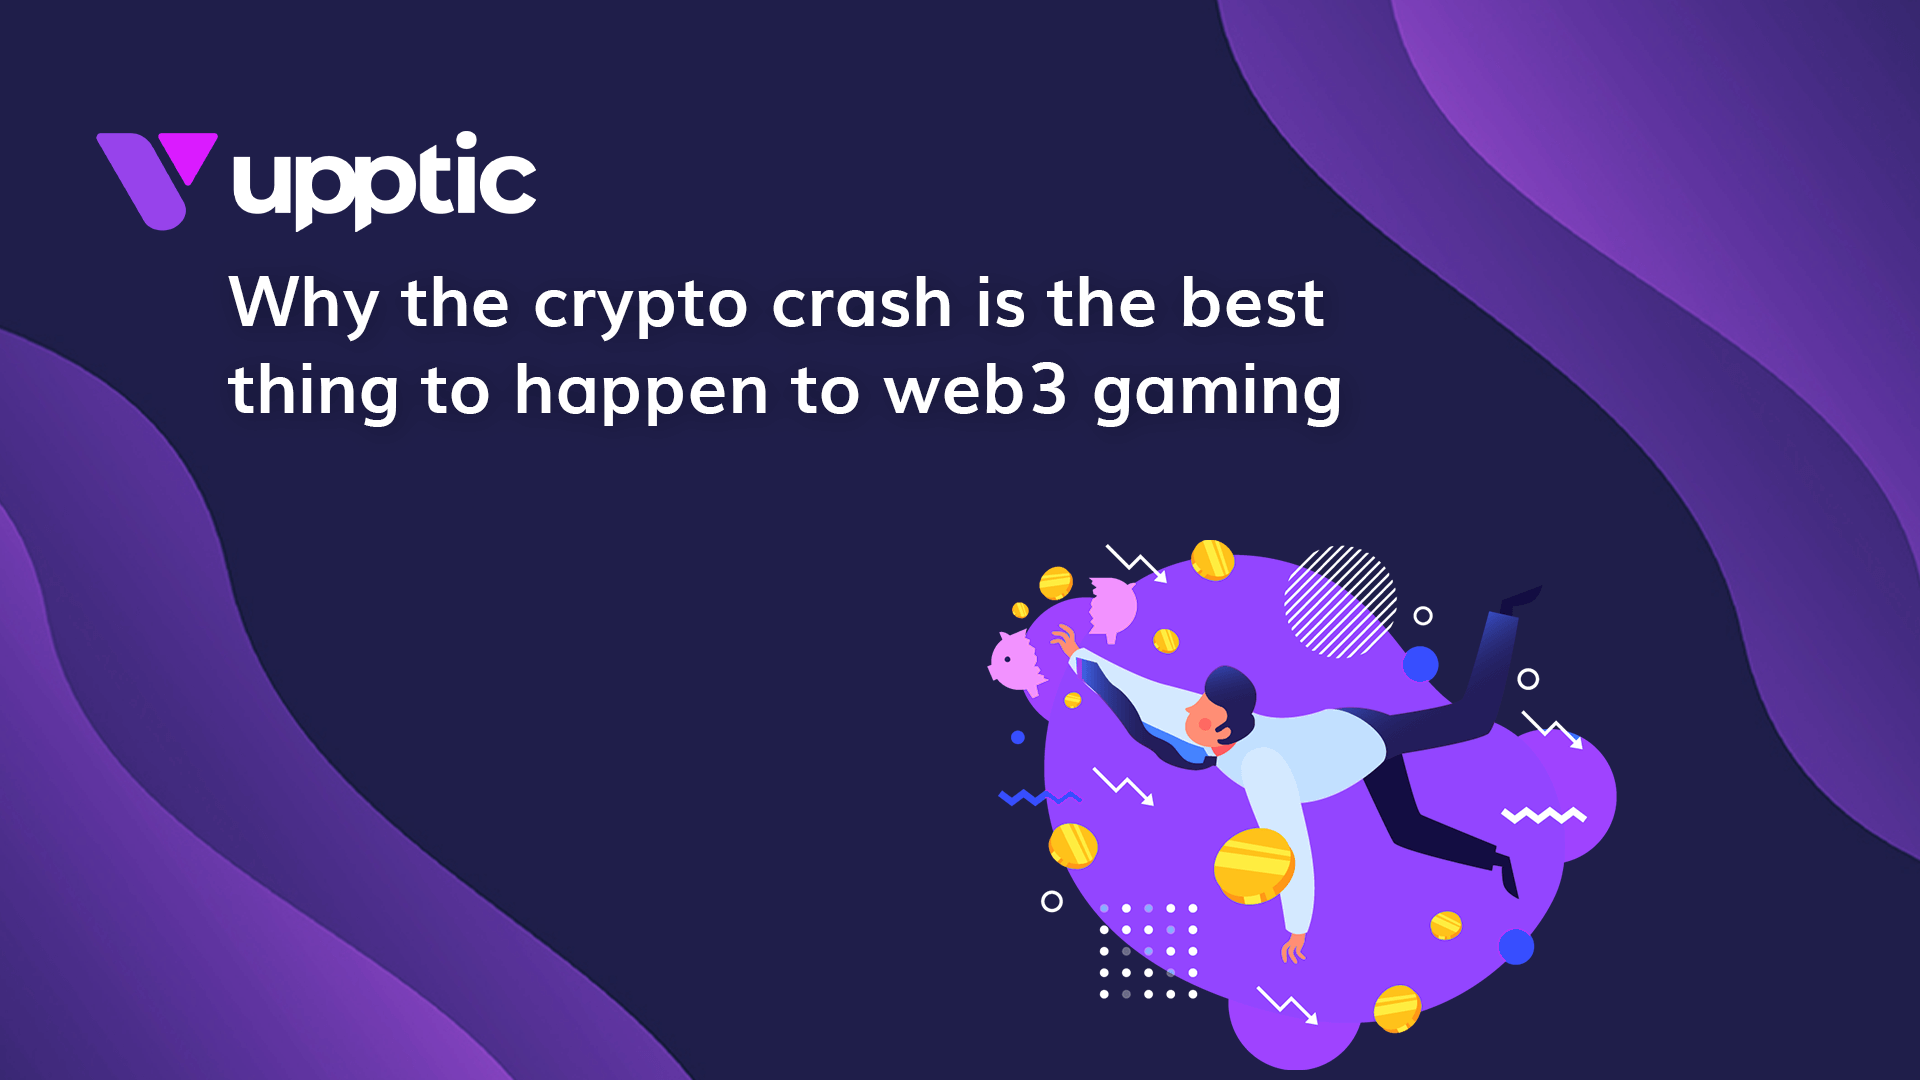 Why the crypto crash is the best thing to happen to web3 gaming